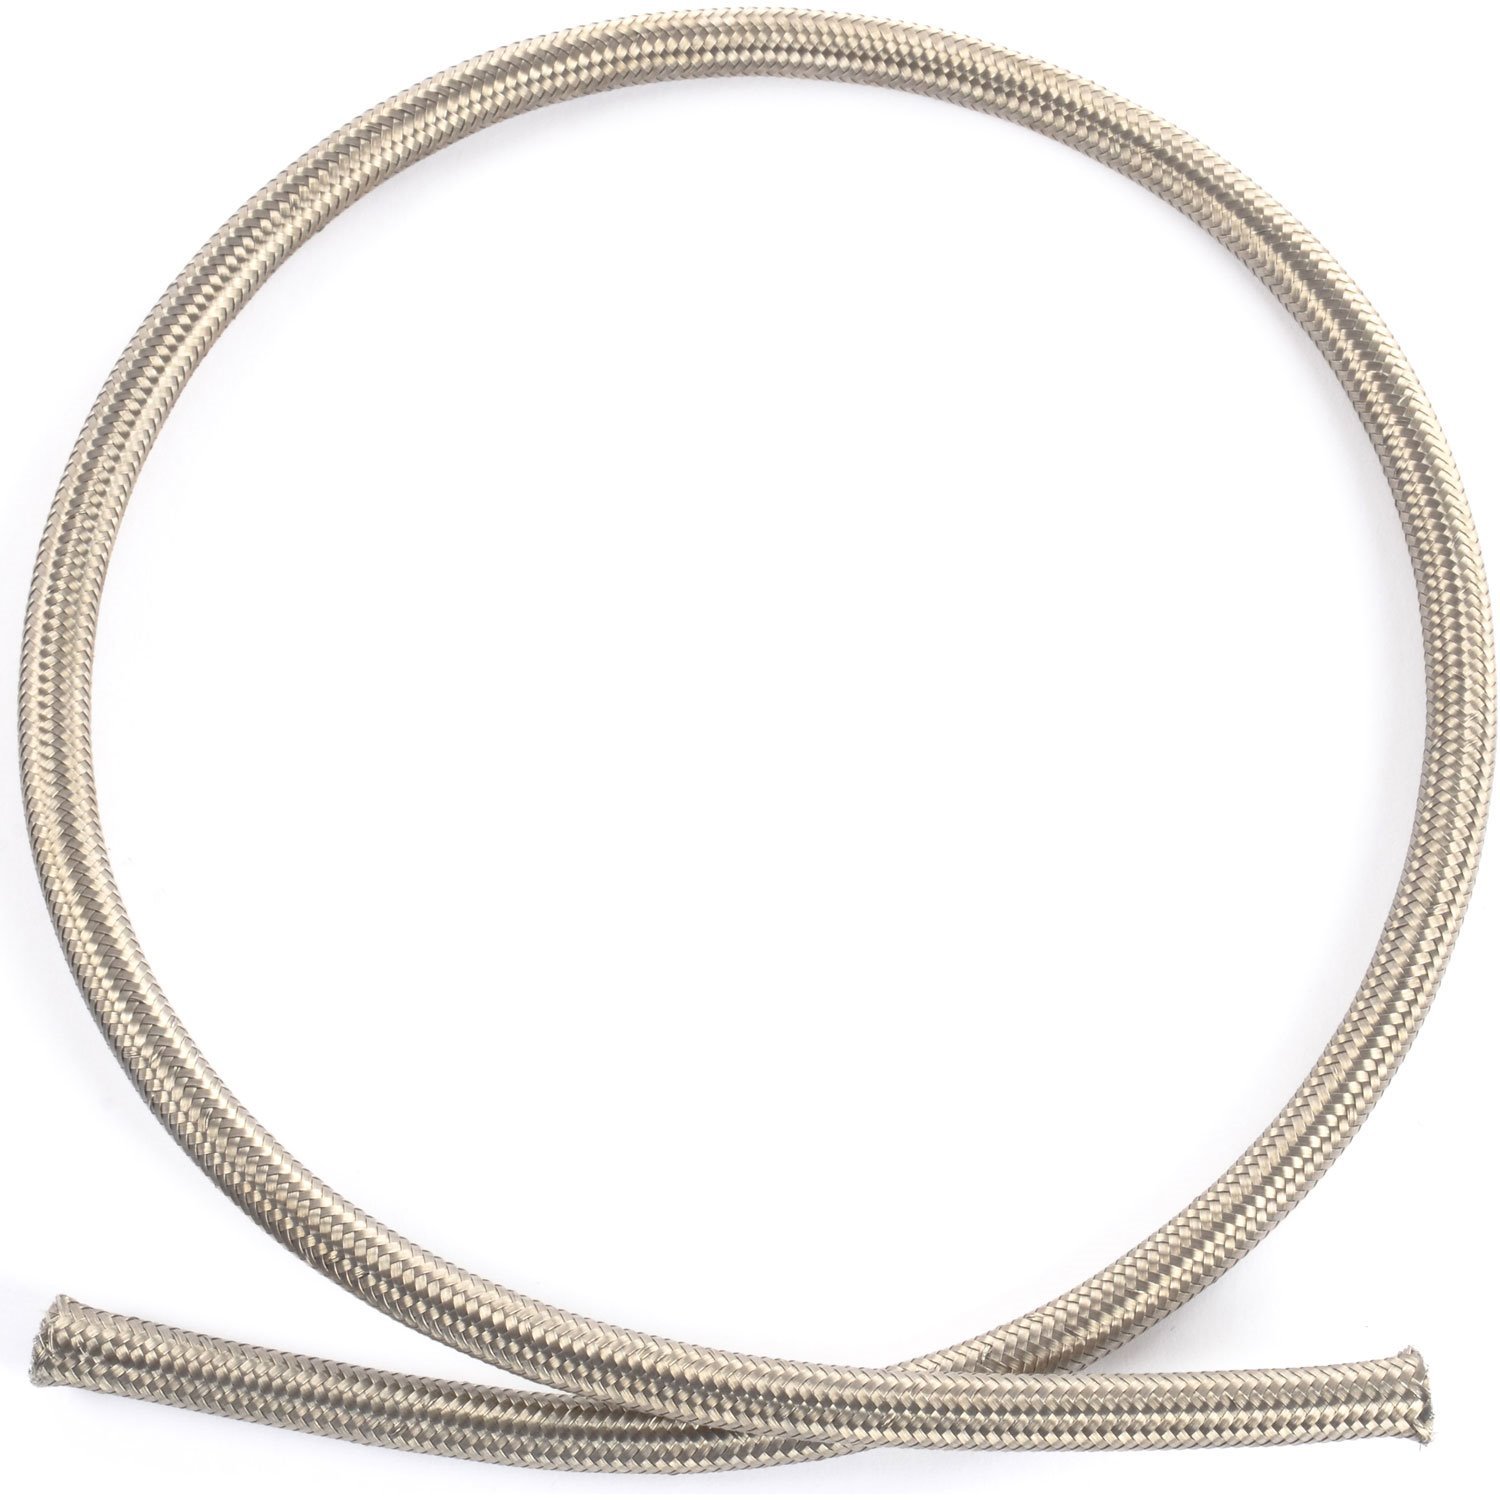 Pro-Flo 200 Series Stainless Steel Braided Hose -4